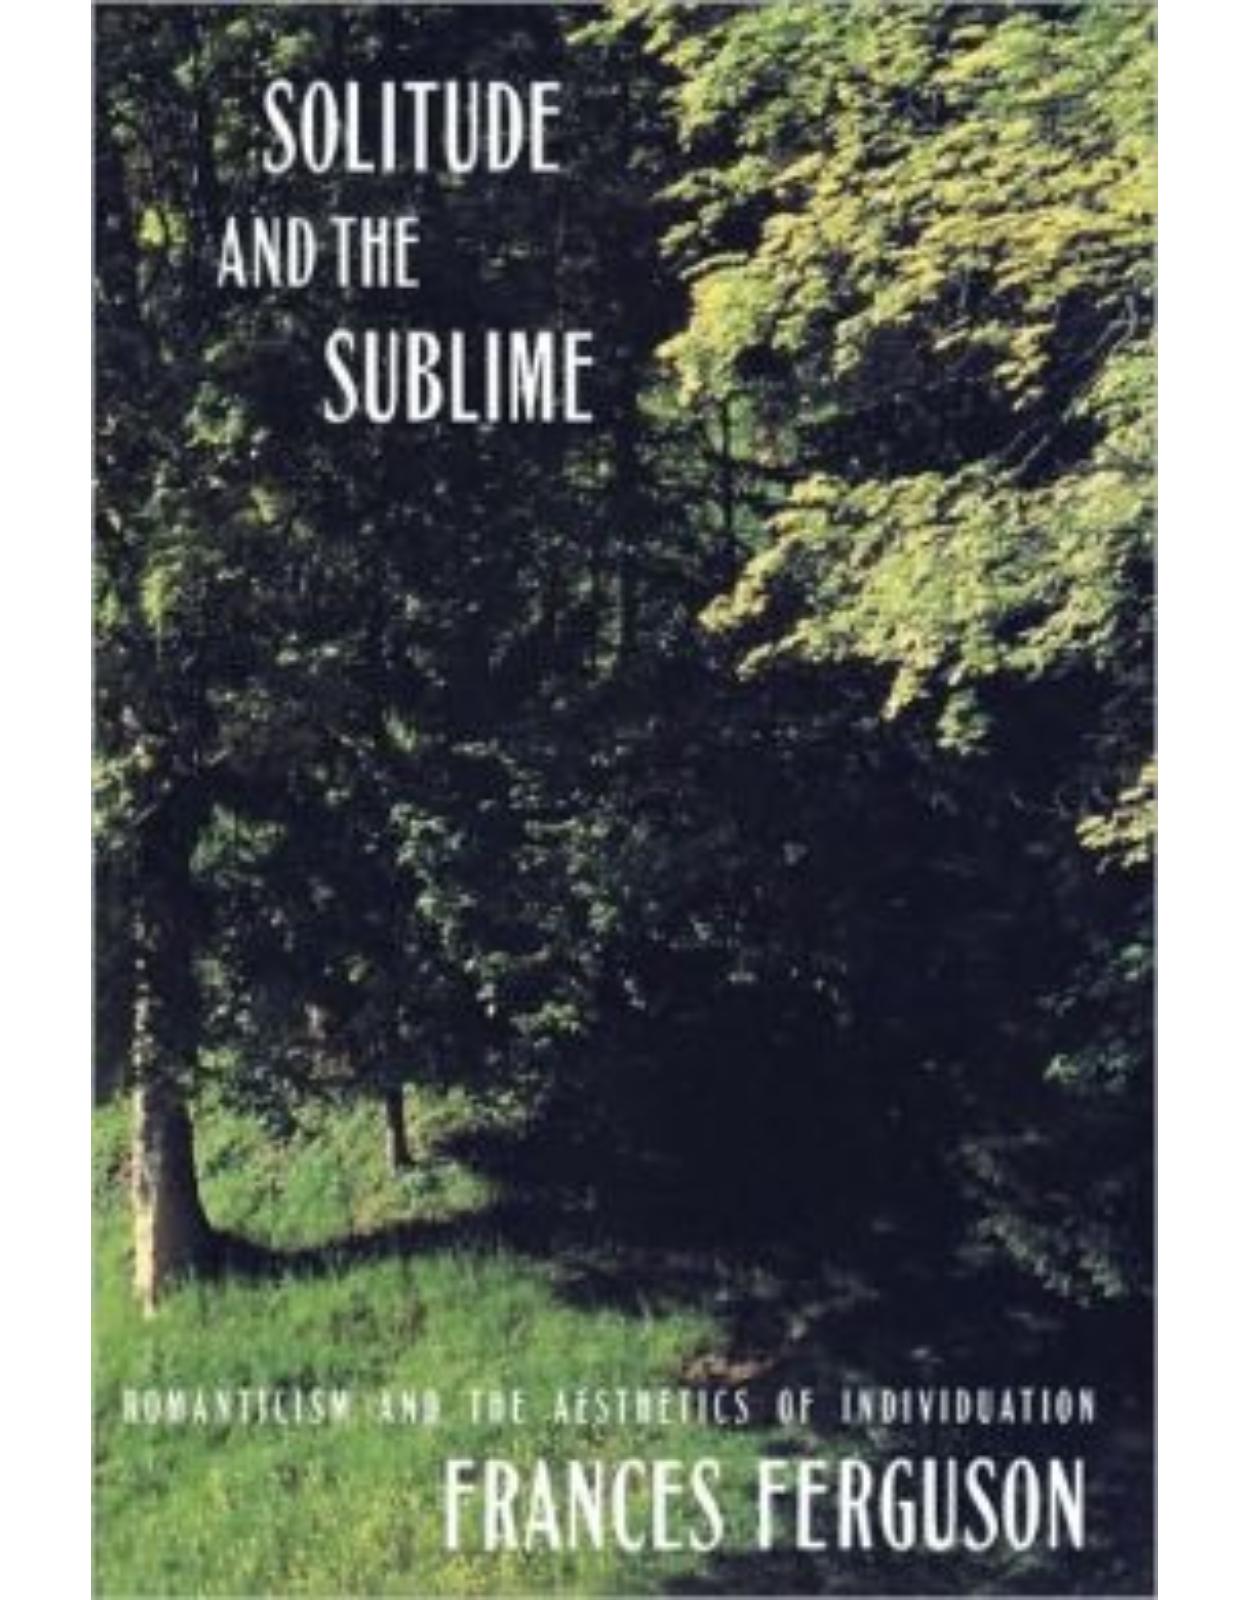 Solitude and the Sublime: Romanticism and the Aesthetics of Individuation